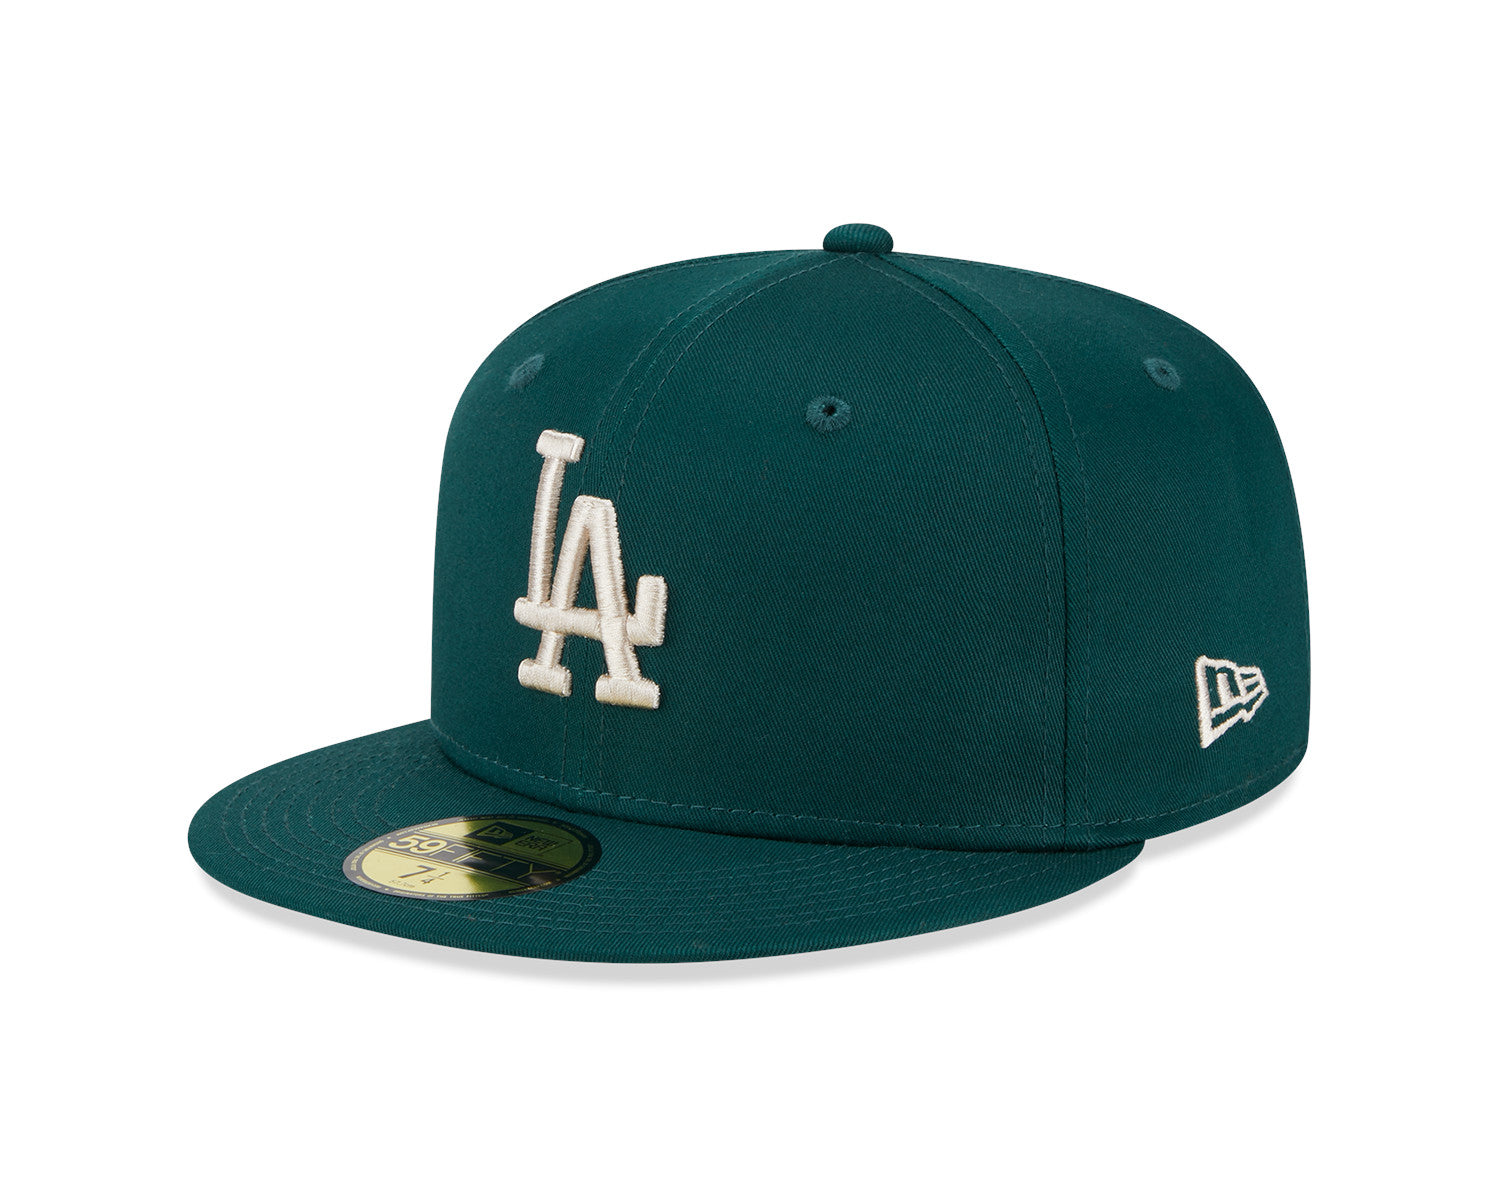 NEW ERA 59FIFTY MLB LEAGUE ESSENTIAL LOS ANGELES DODGERS TEAM FITTED GREEN CAP